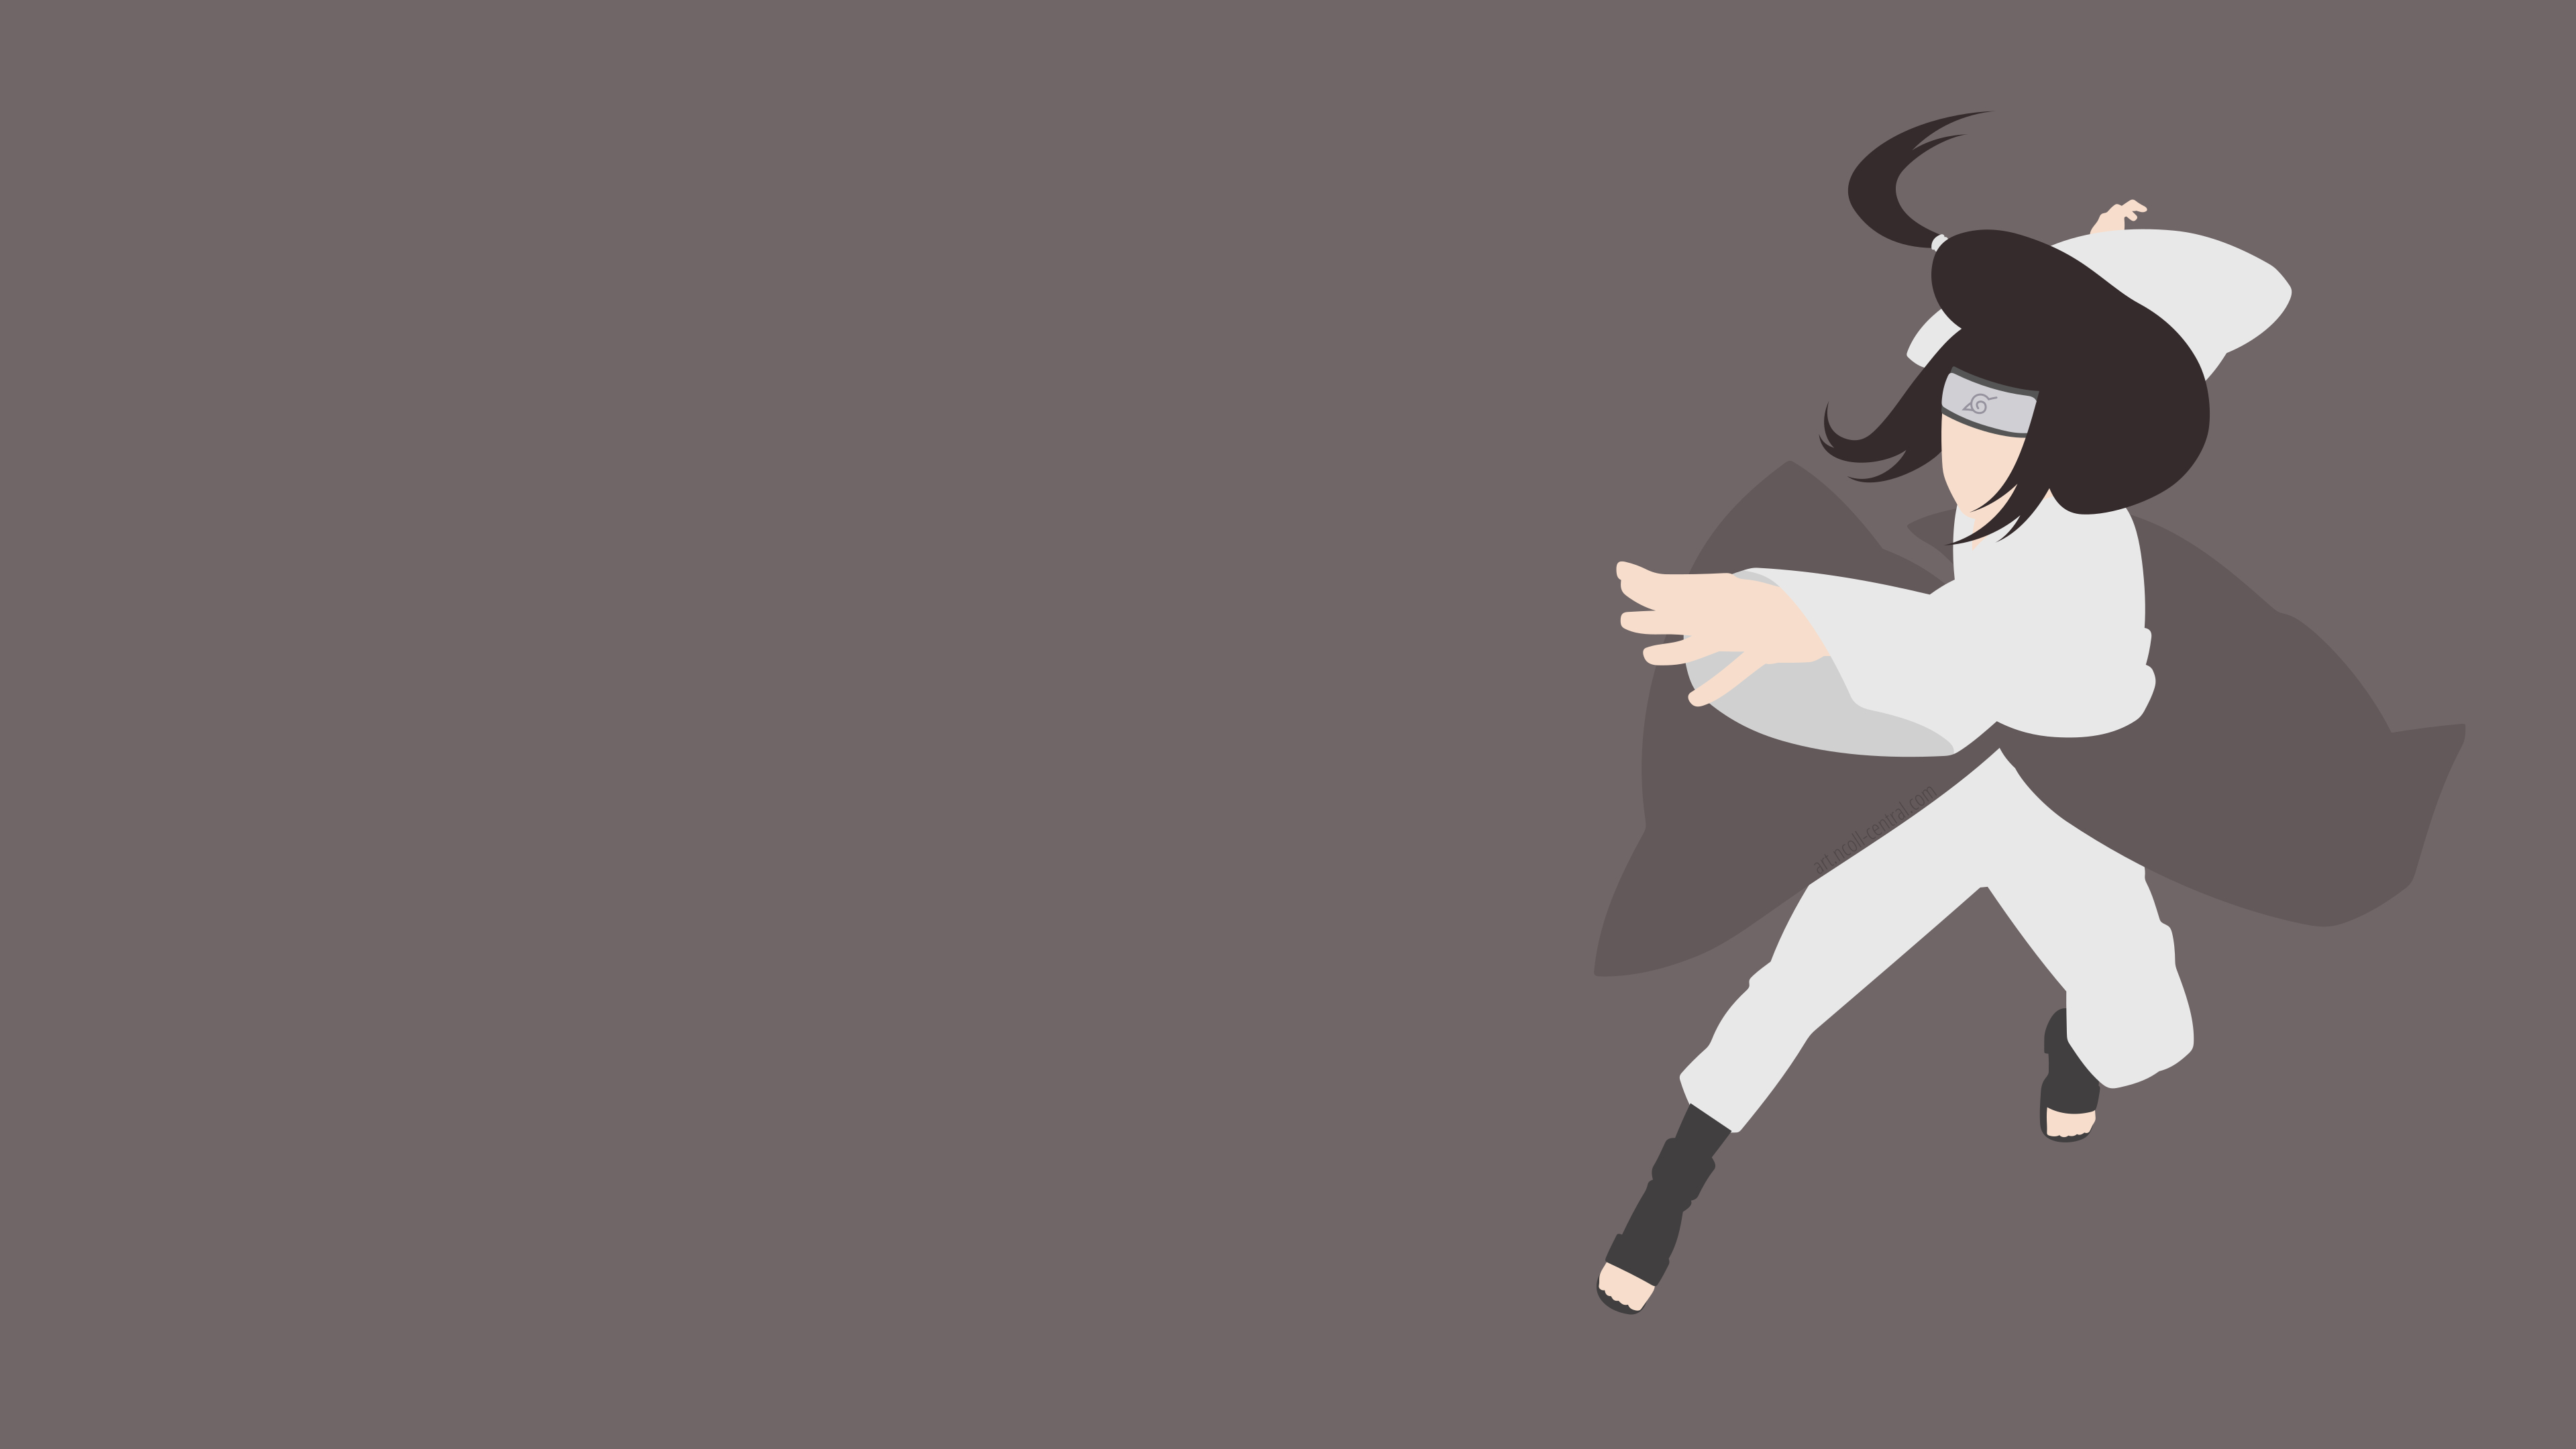 3840x2160 70+ Neji Hy&Aring;&laquo;ga HD Wallpapers and Backgrounds